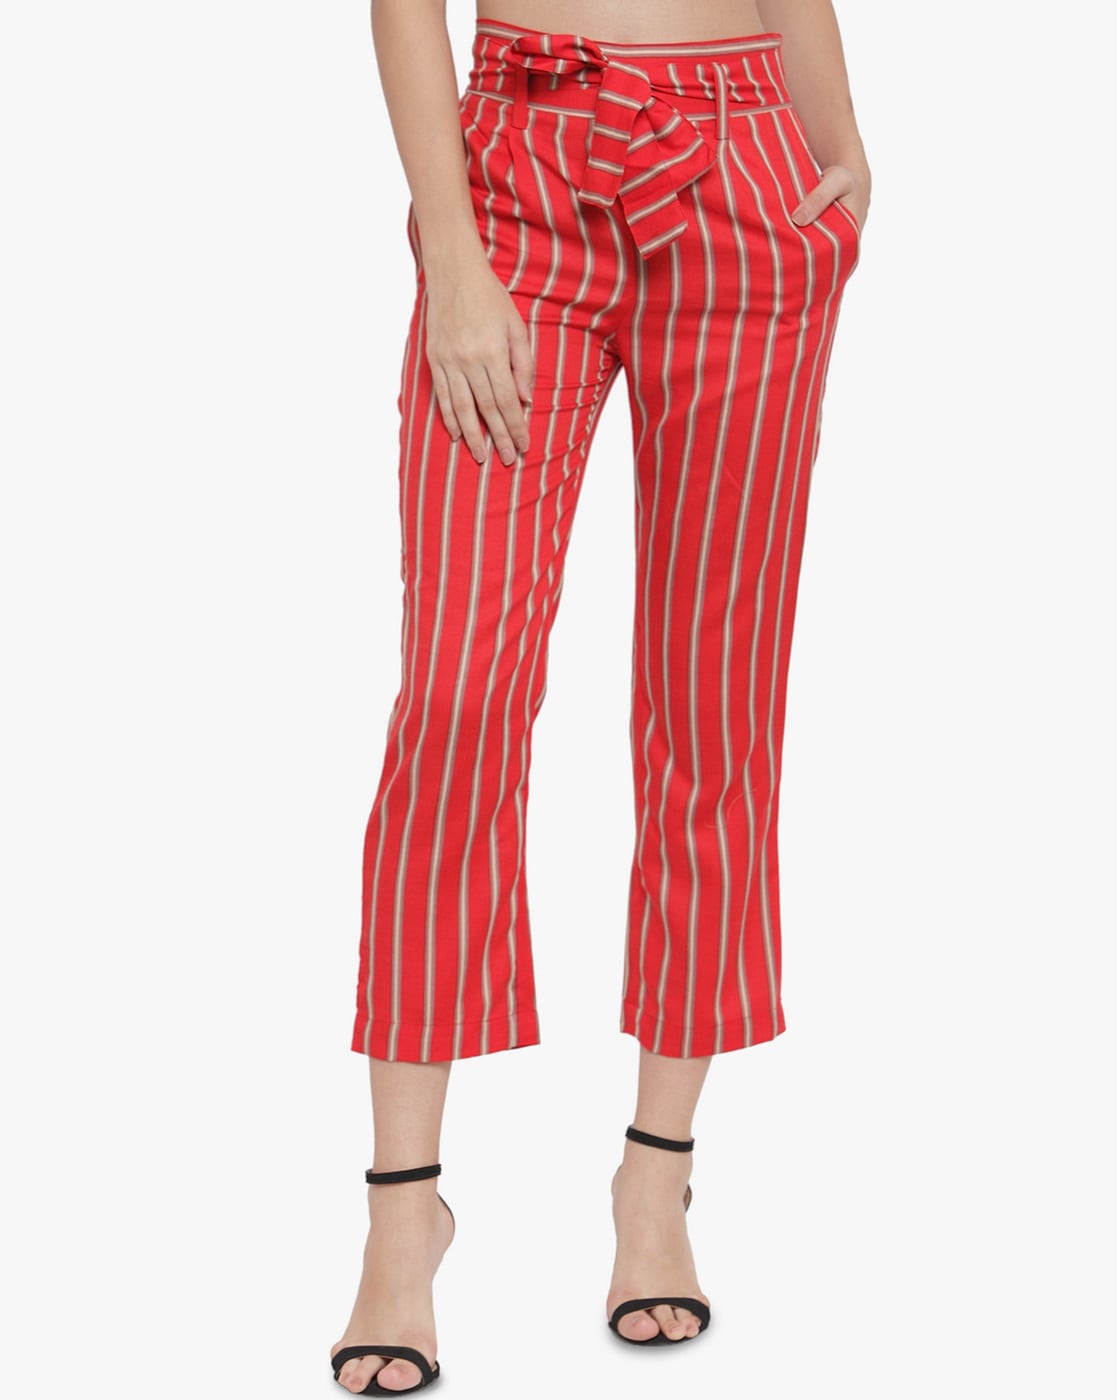 RAREISM Women Green Striped Trousers Price in India Full Specifications   Offers  DTashioncom